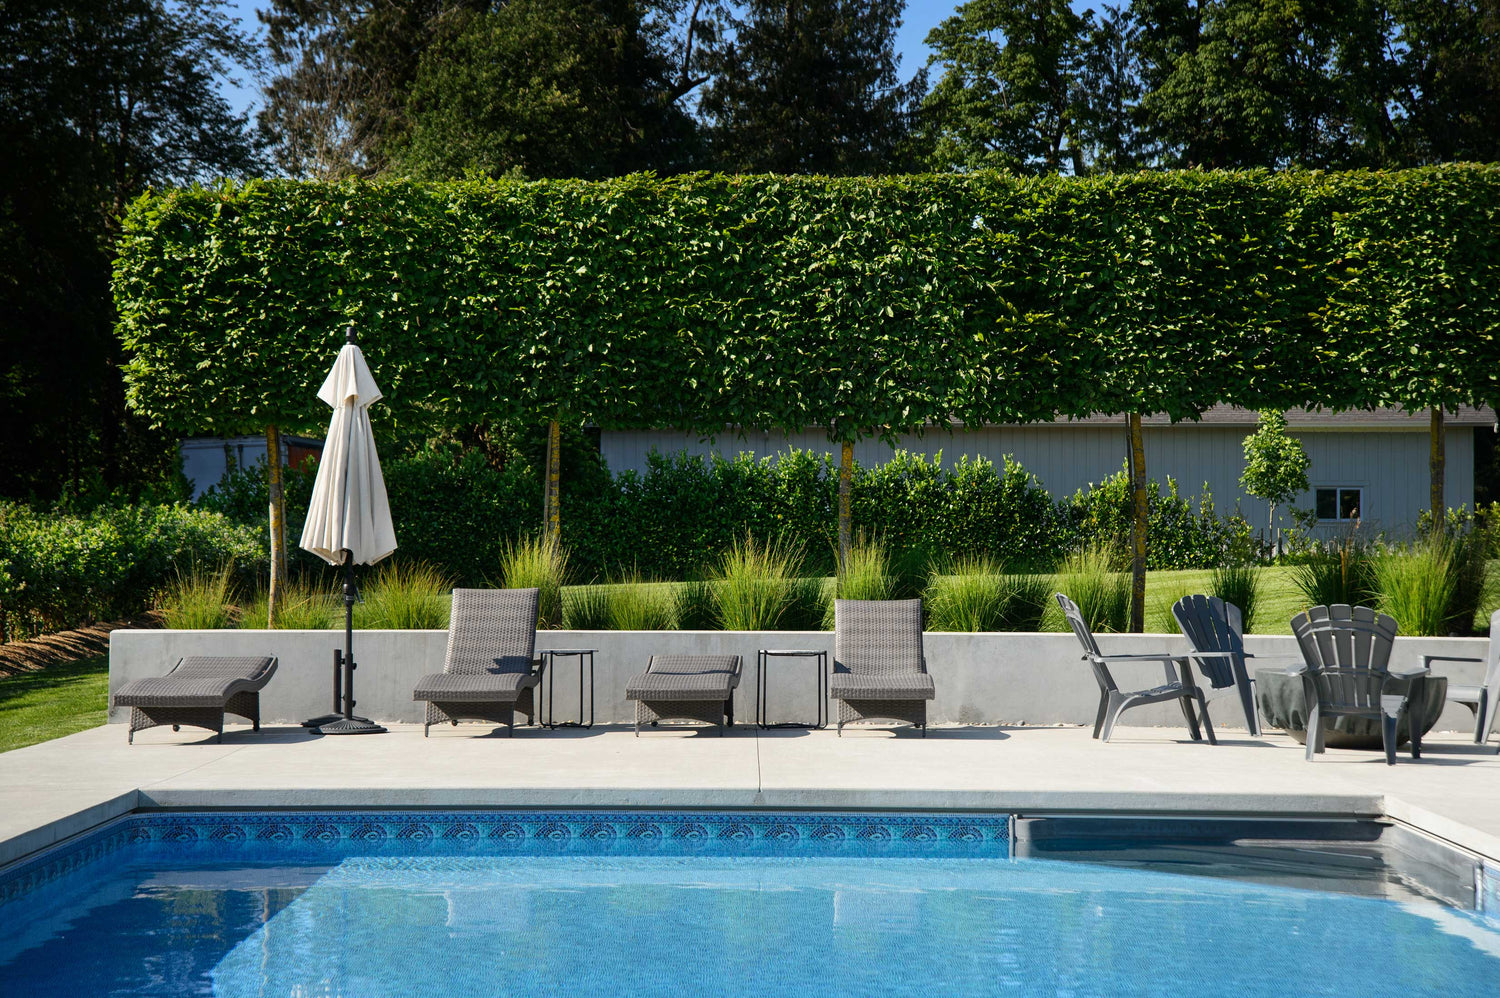 Landscape design showing blue pool, lawn furniture and impressive square shaped topiary trees in the background. 